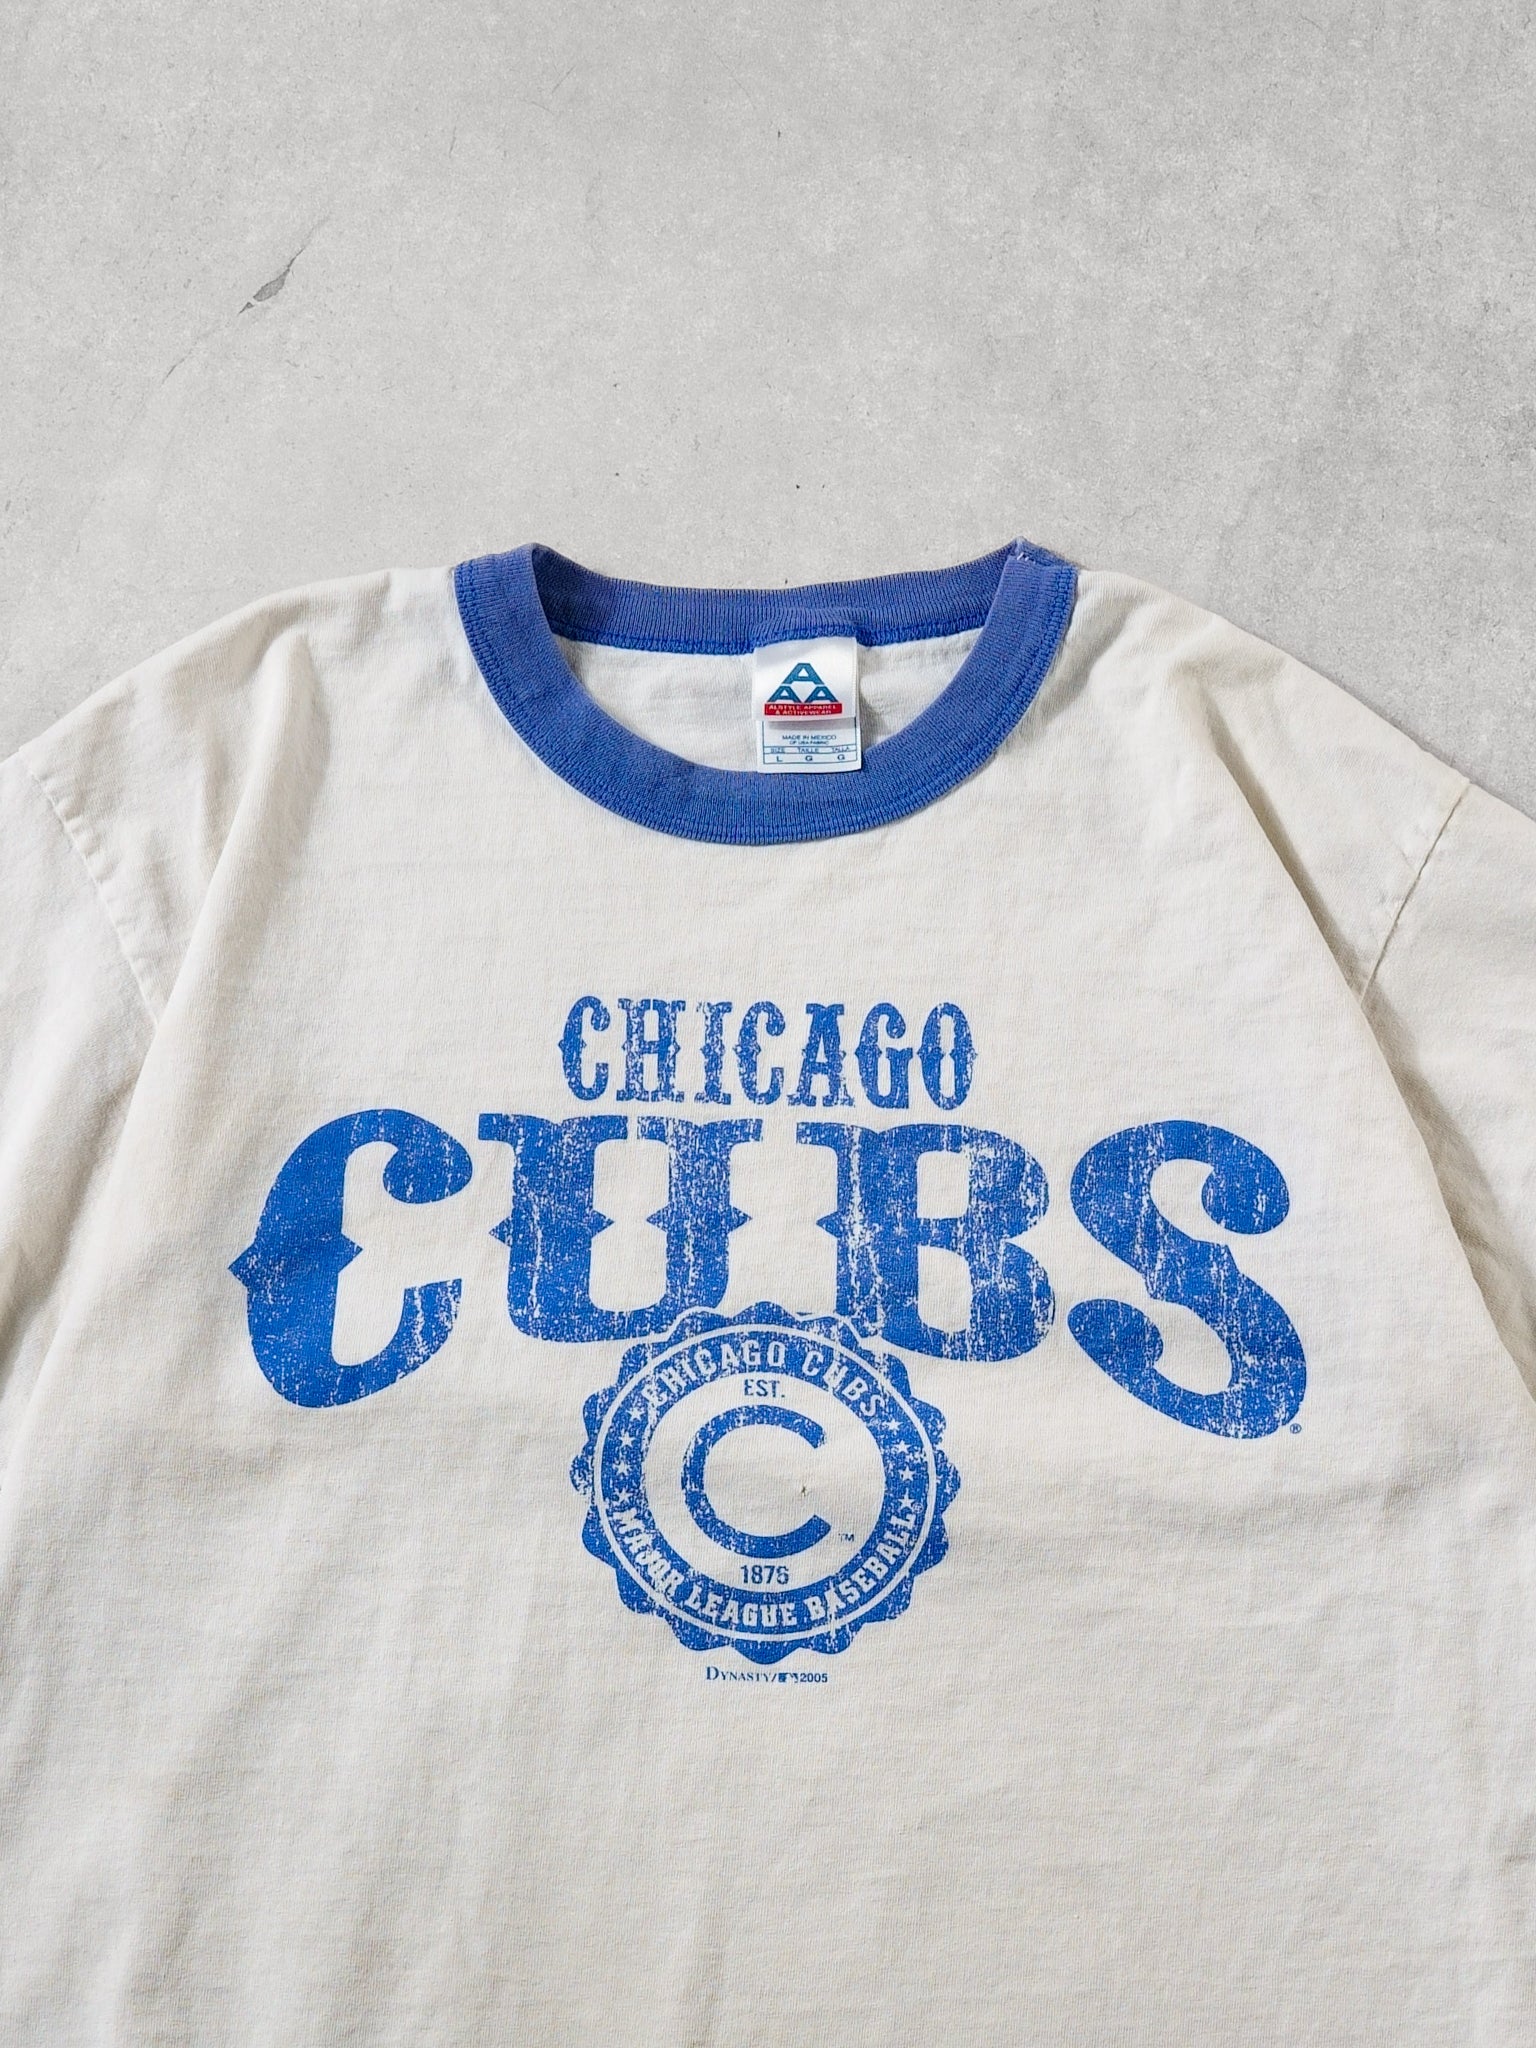 Vintage 05' White And Blue Chicago Cubs Emblem Tee (M)